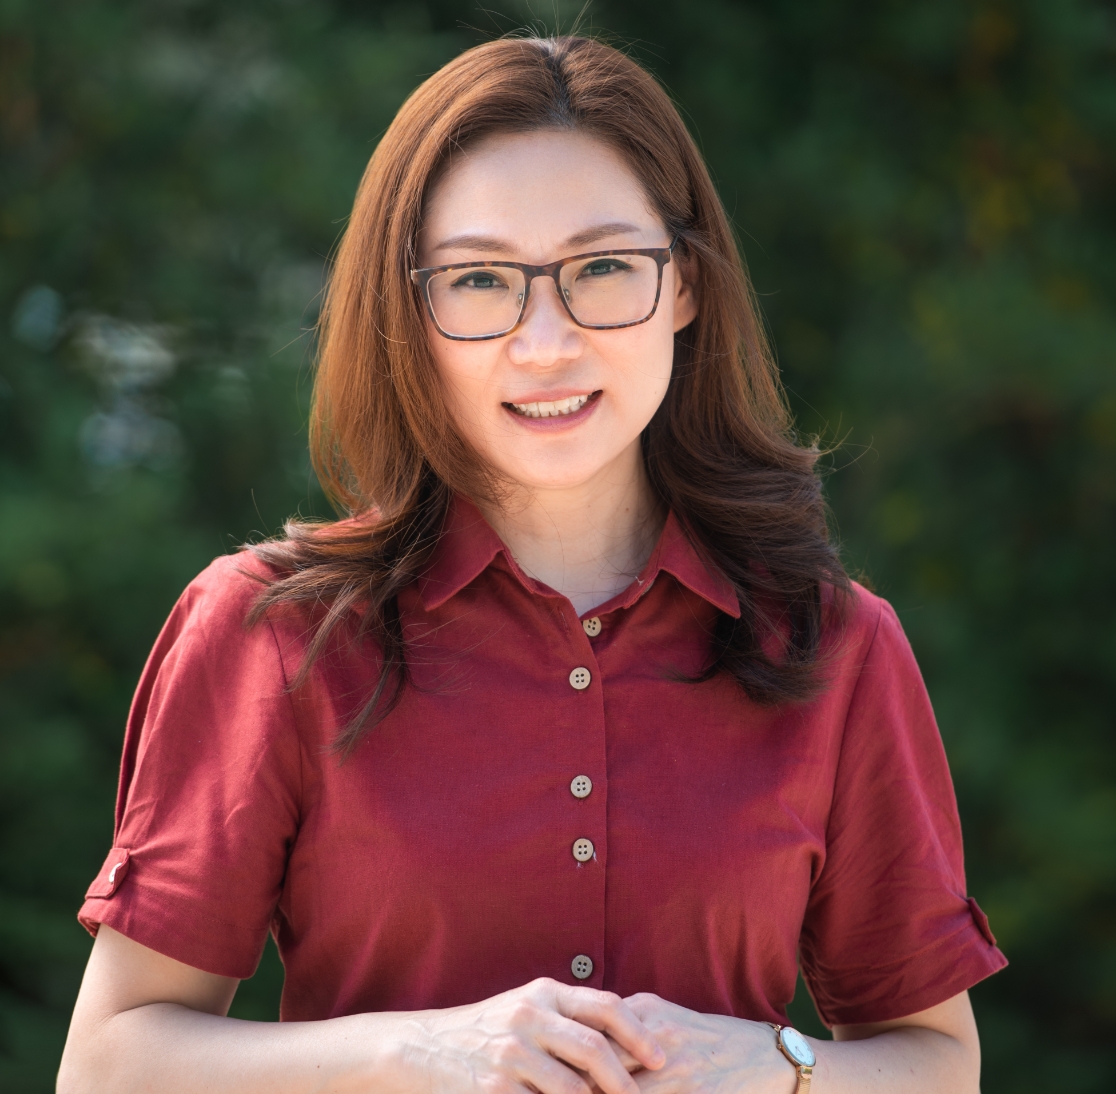 <h5 class="font-primary color-primary mt-4 mb-0 ls-0">Dr. Wendy Yee</h5>
<p>교장</p>
